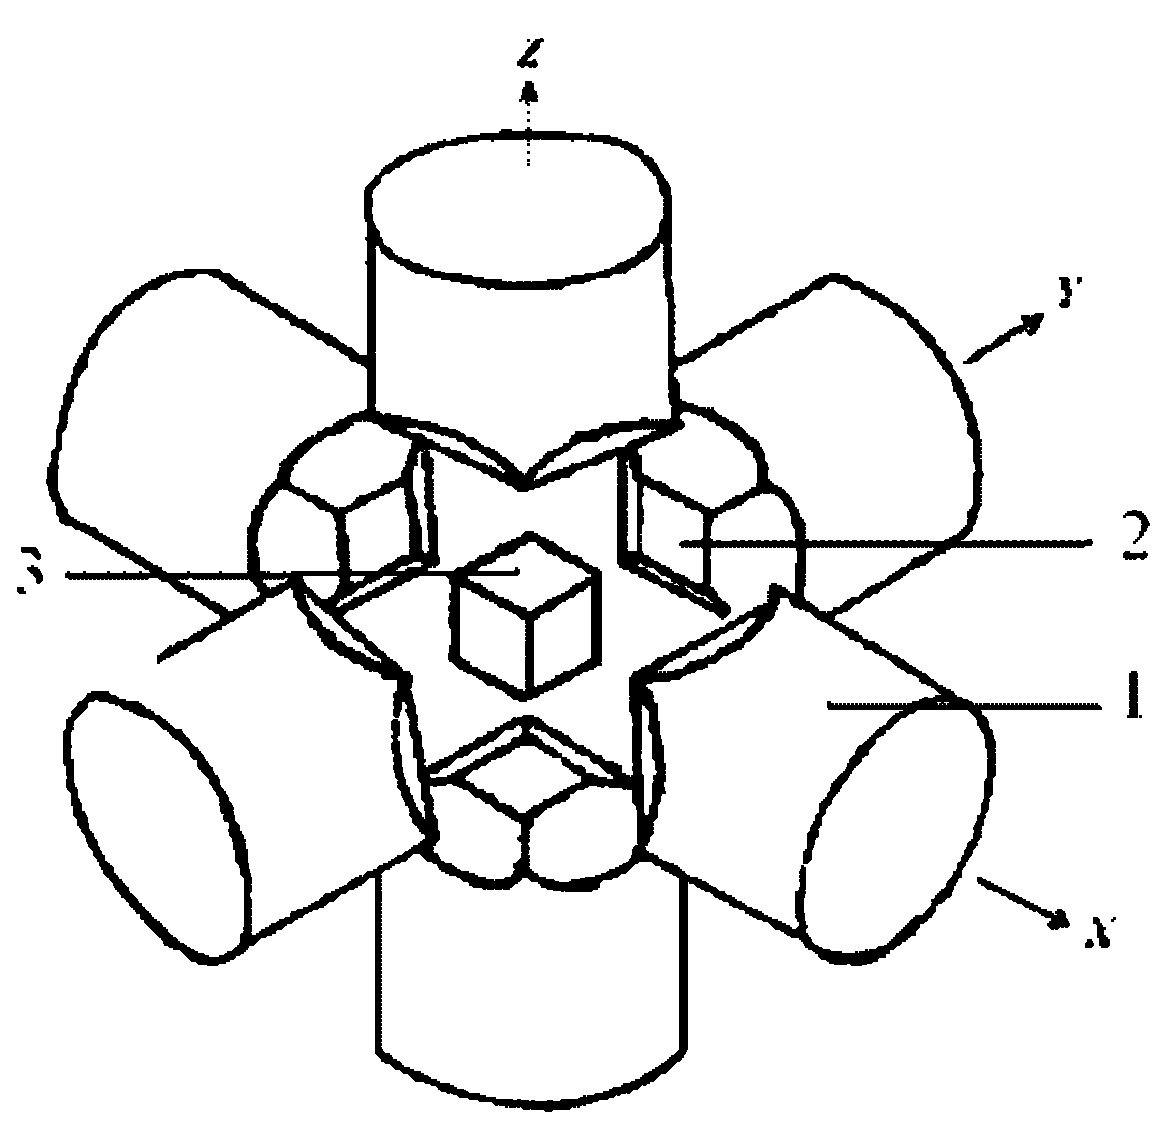 Ultra-high pressure device based on hinged-type hexahedral press